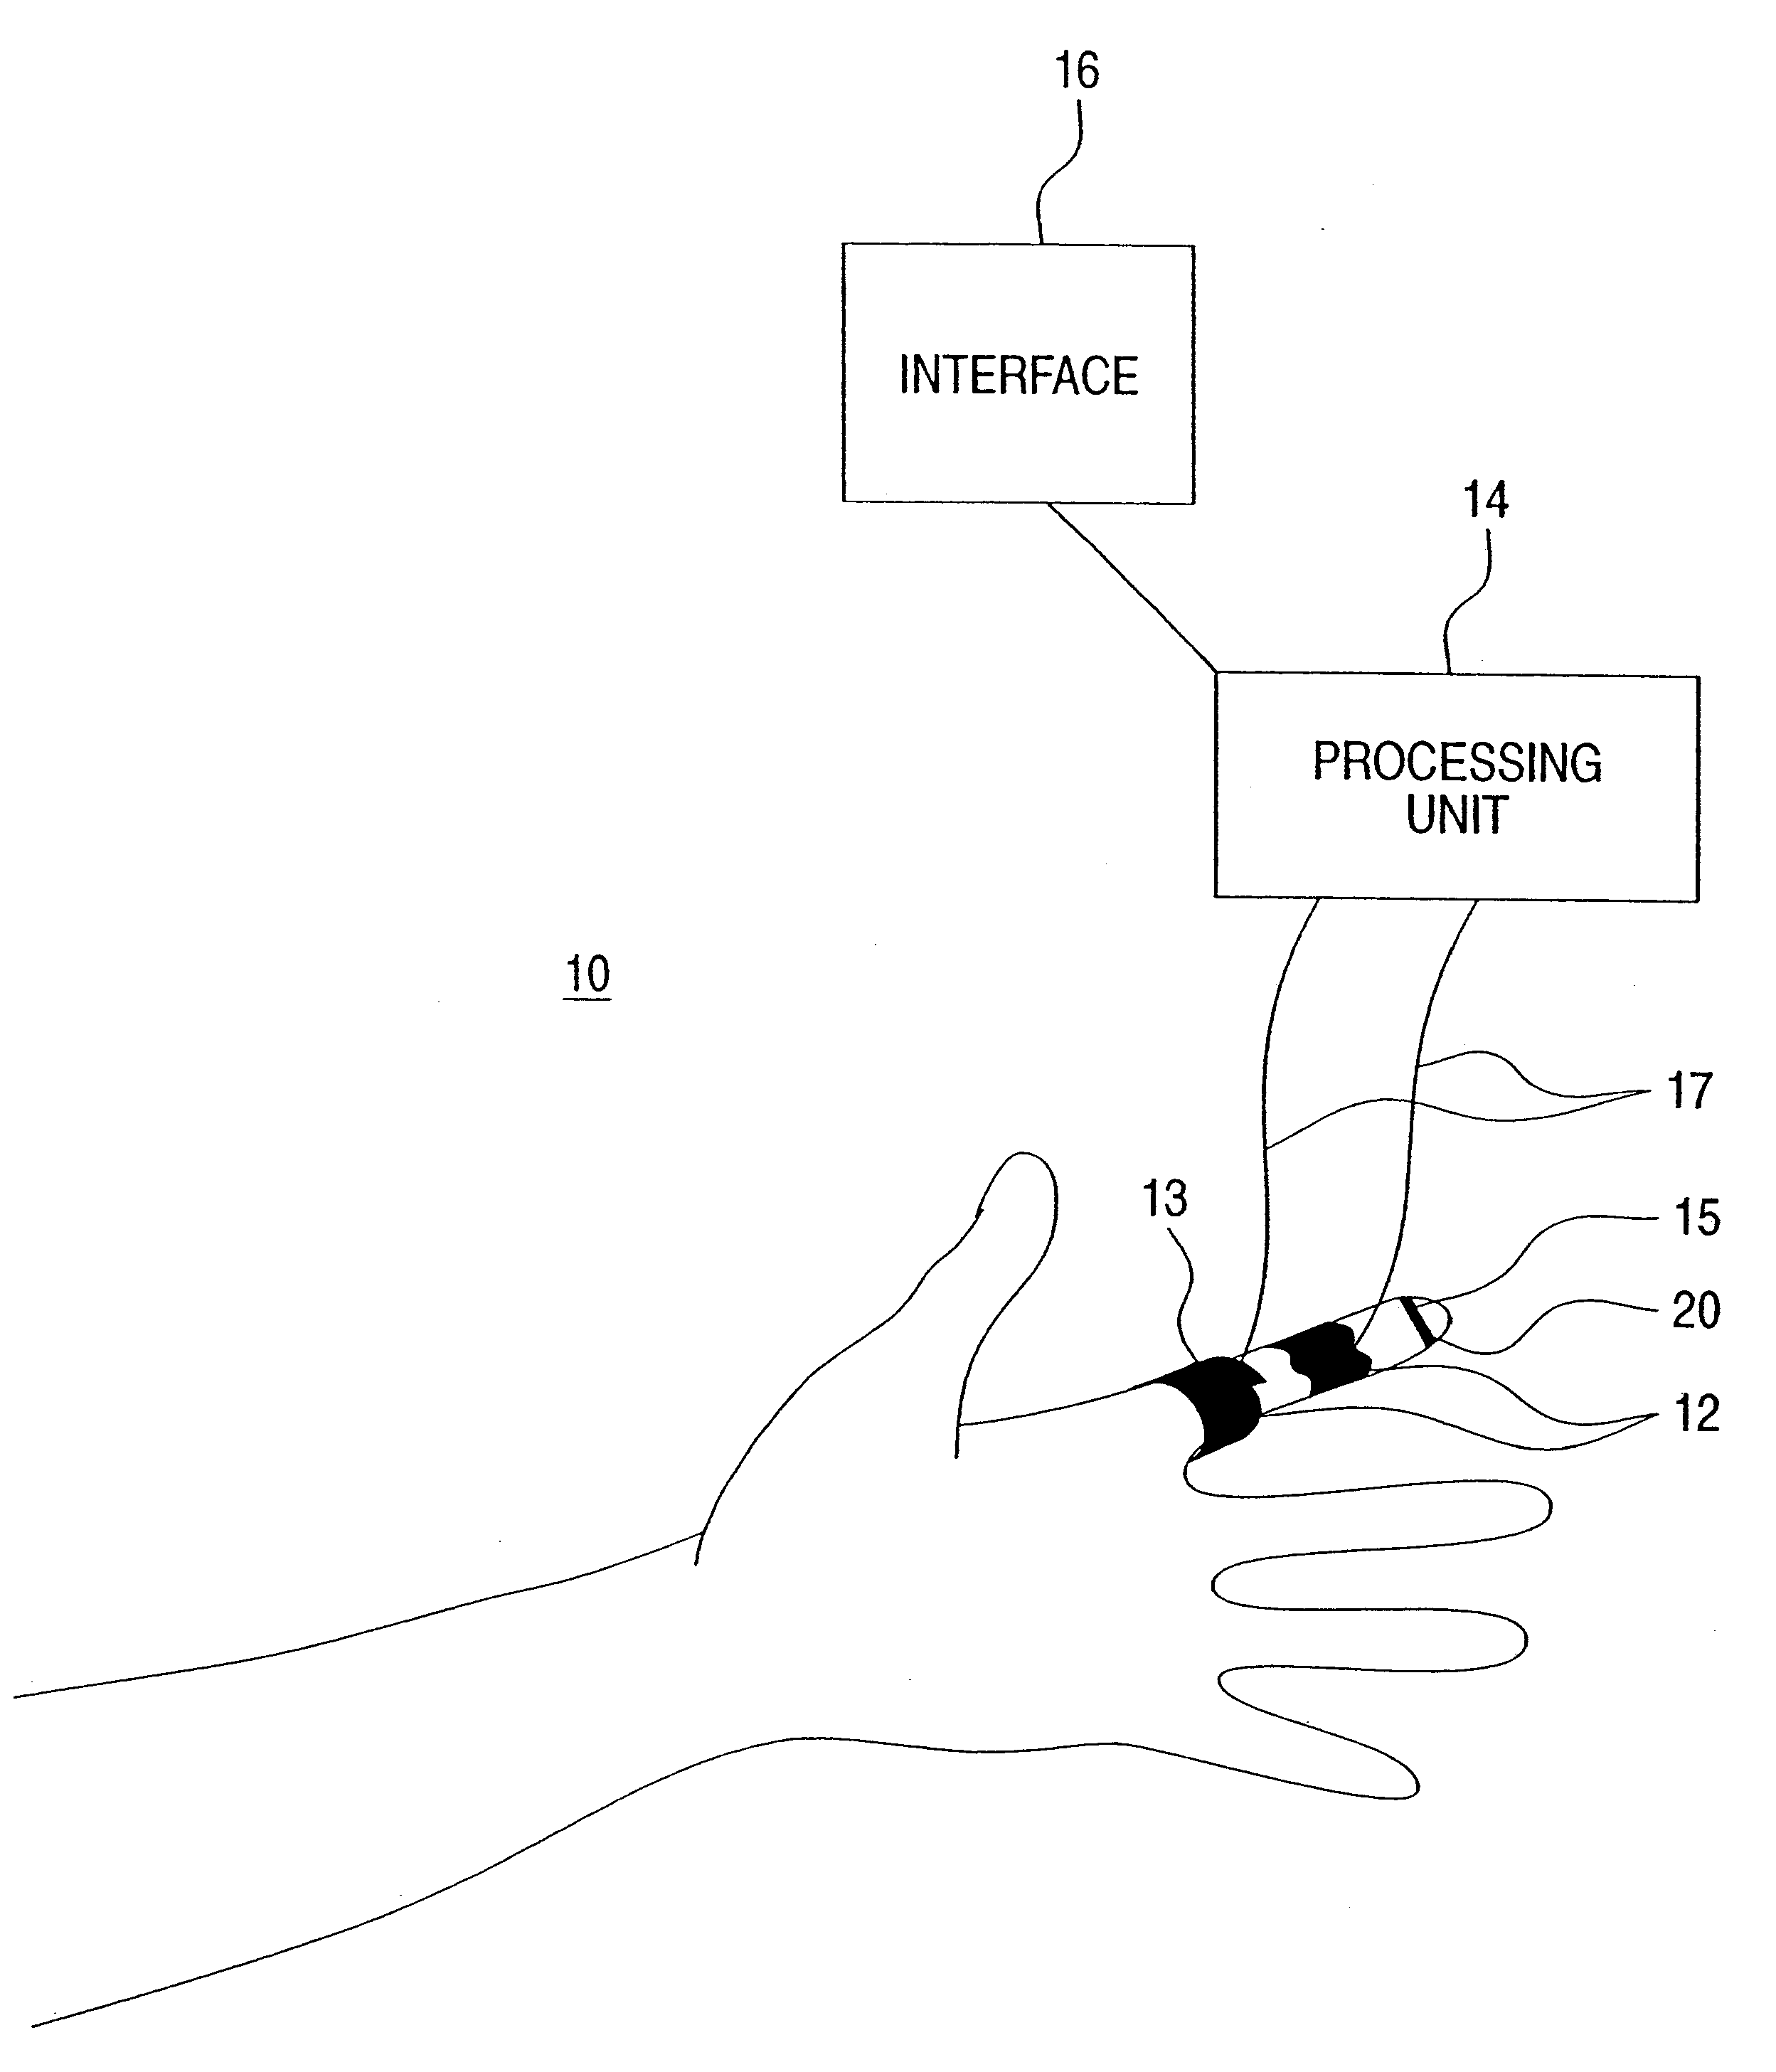 System and method for non-invasively monitoring hemodynamic parameters